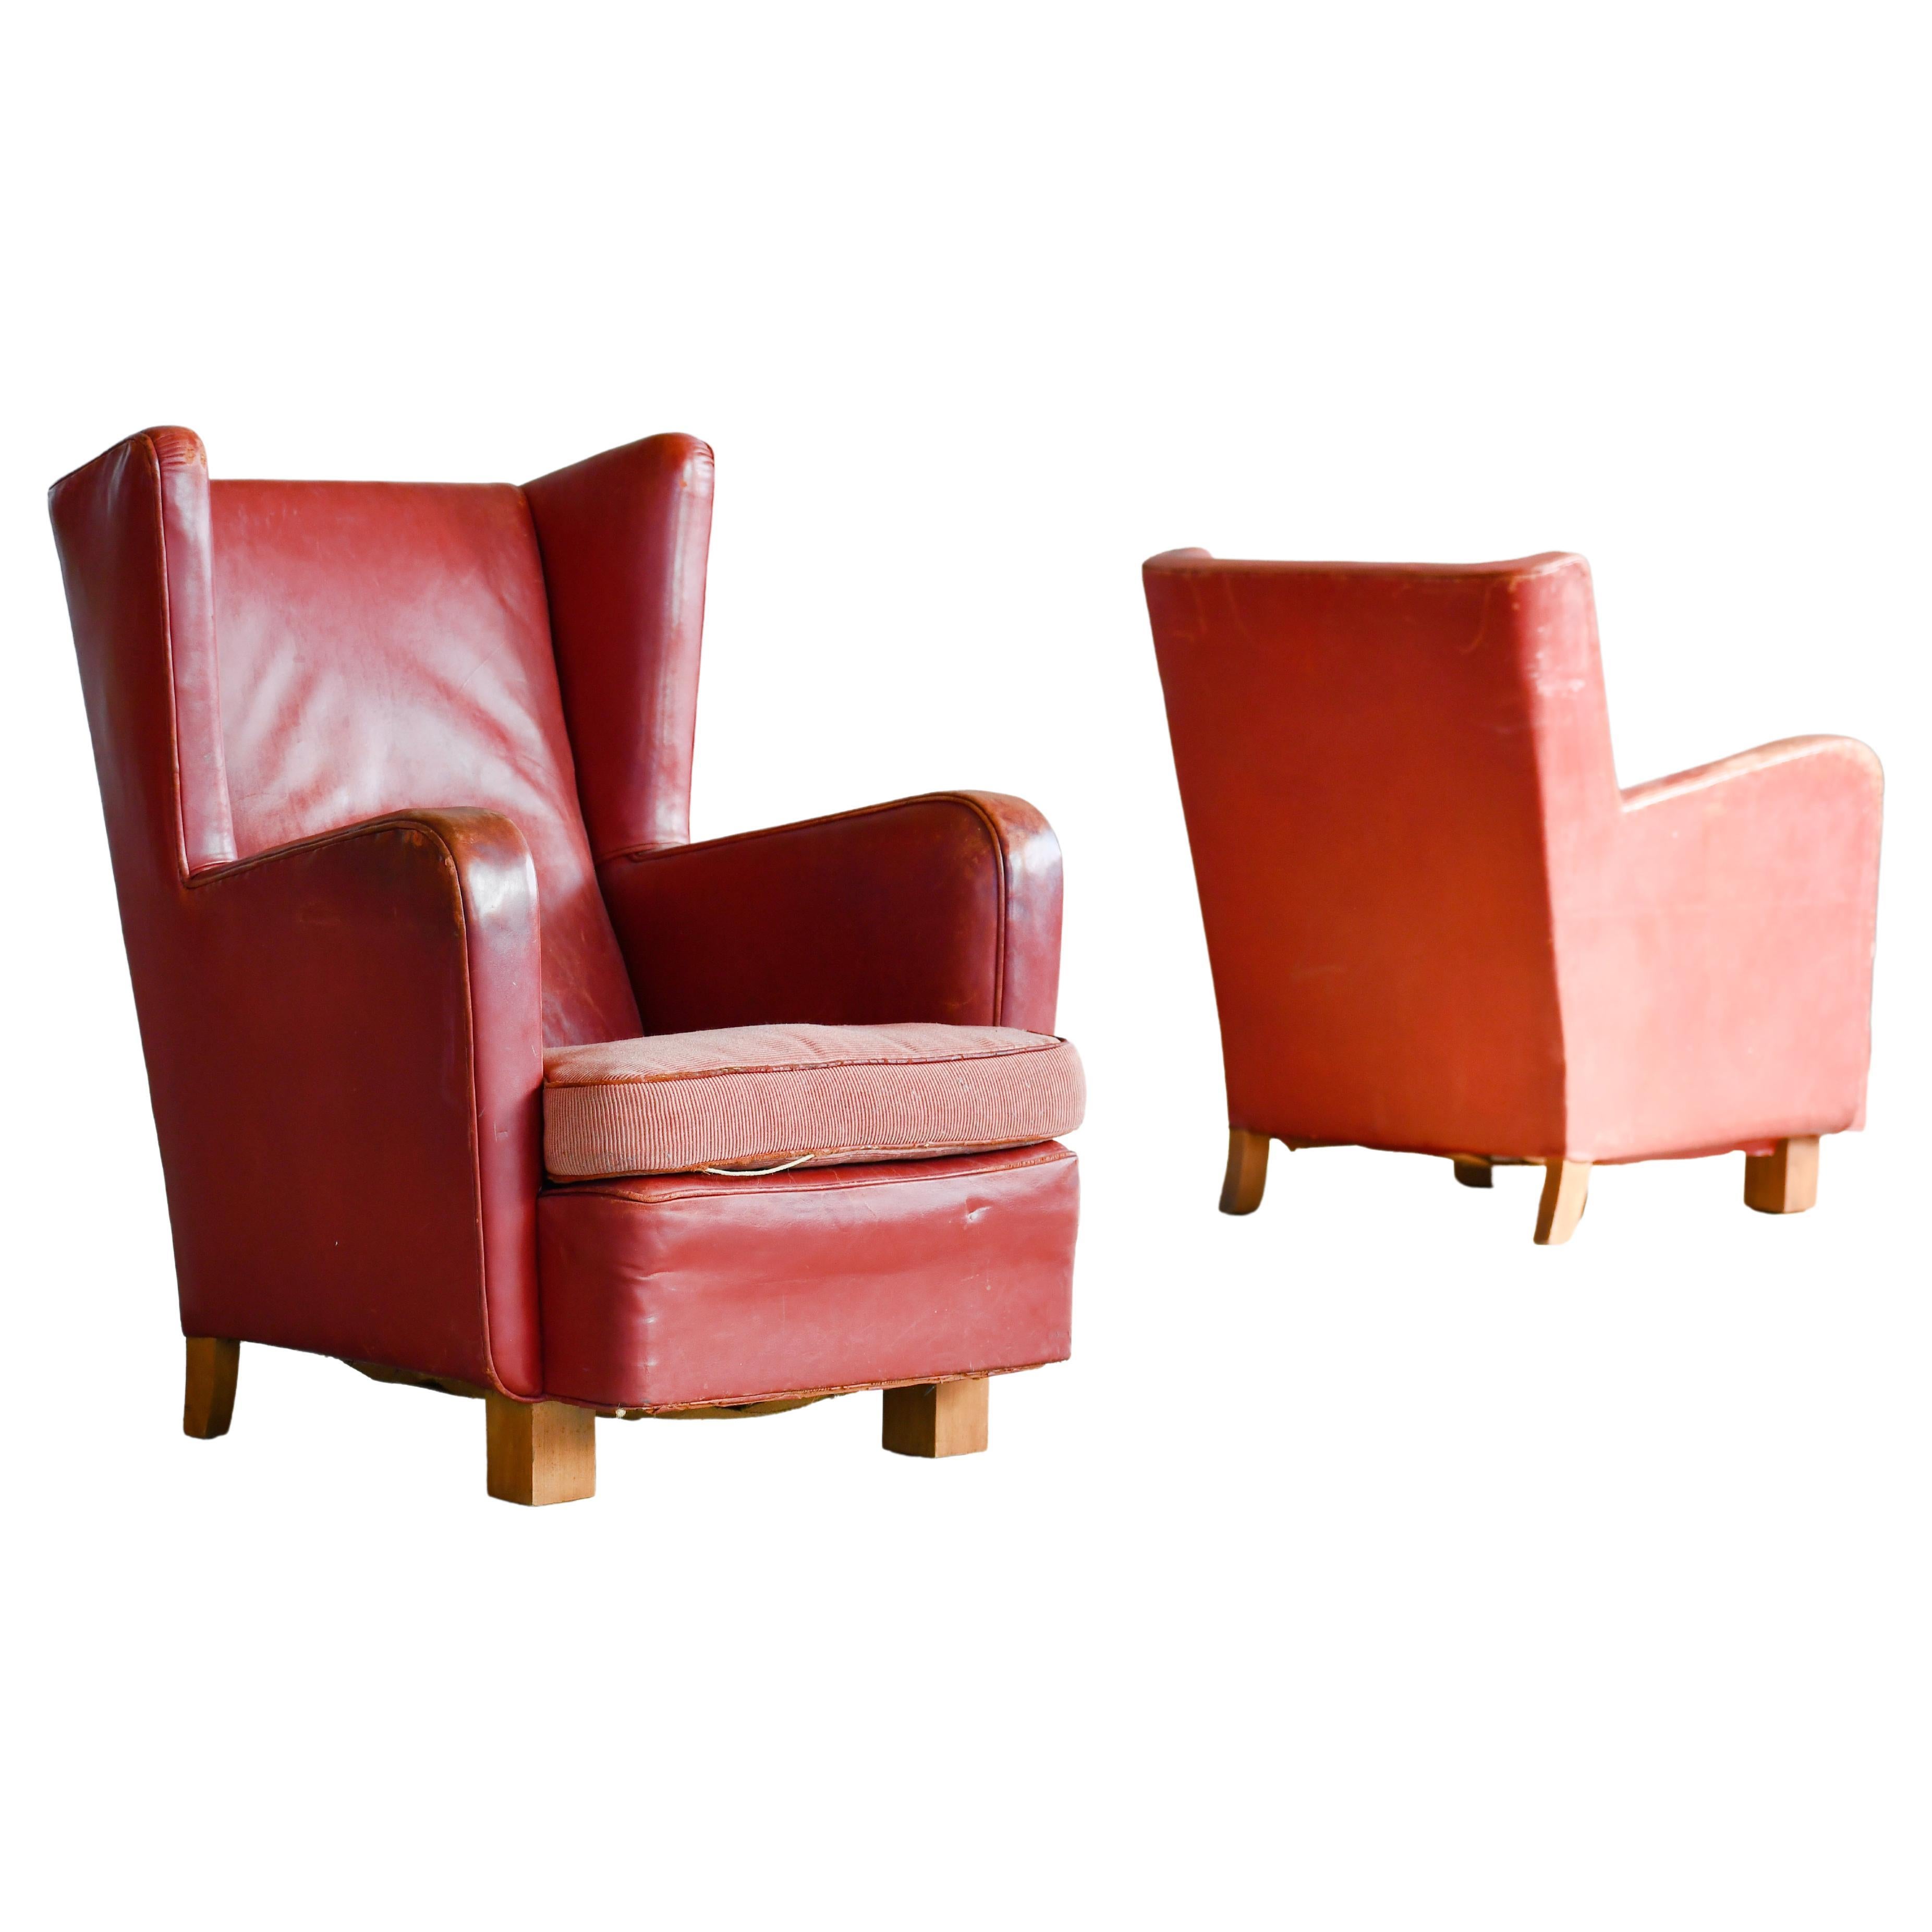 Danish 1940s Pair of Club Chairs in Reddish Leather 